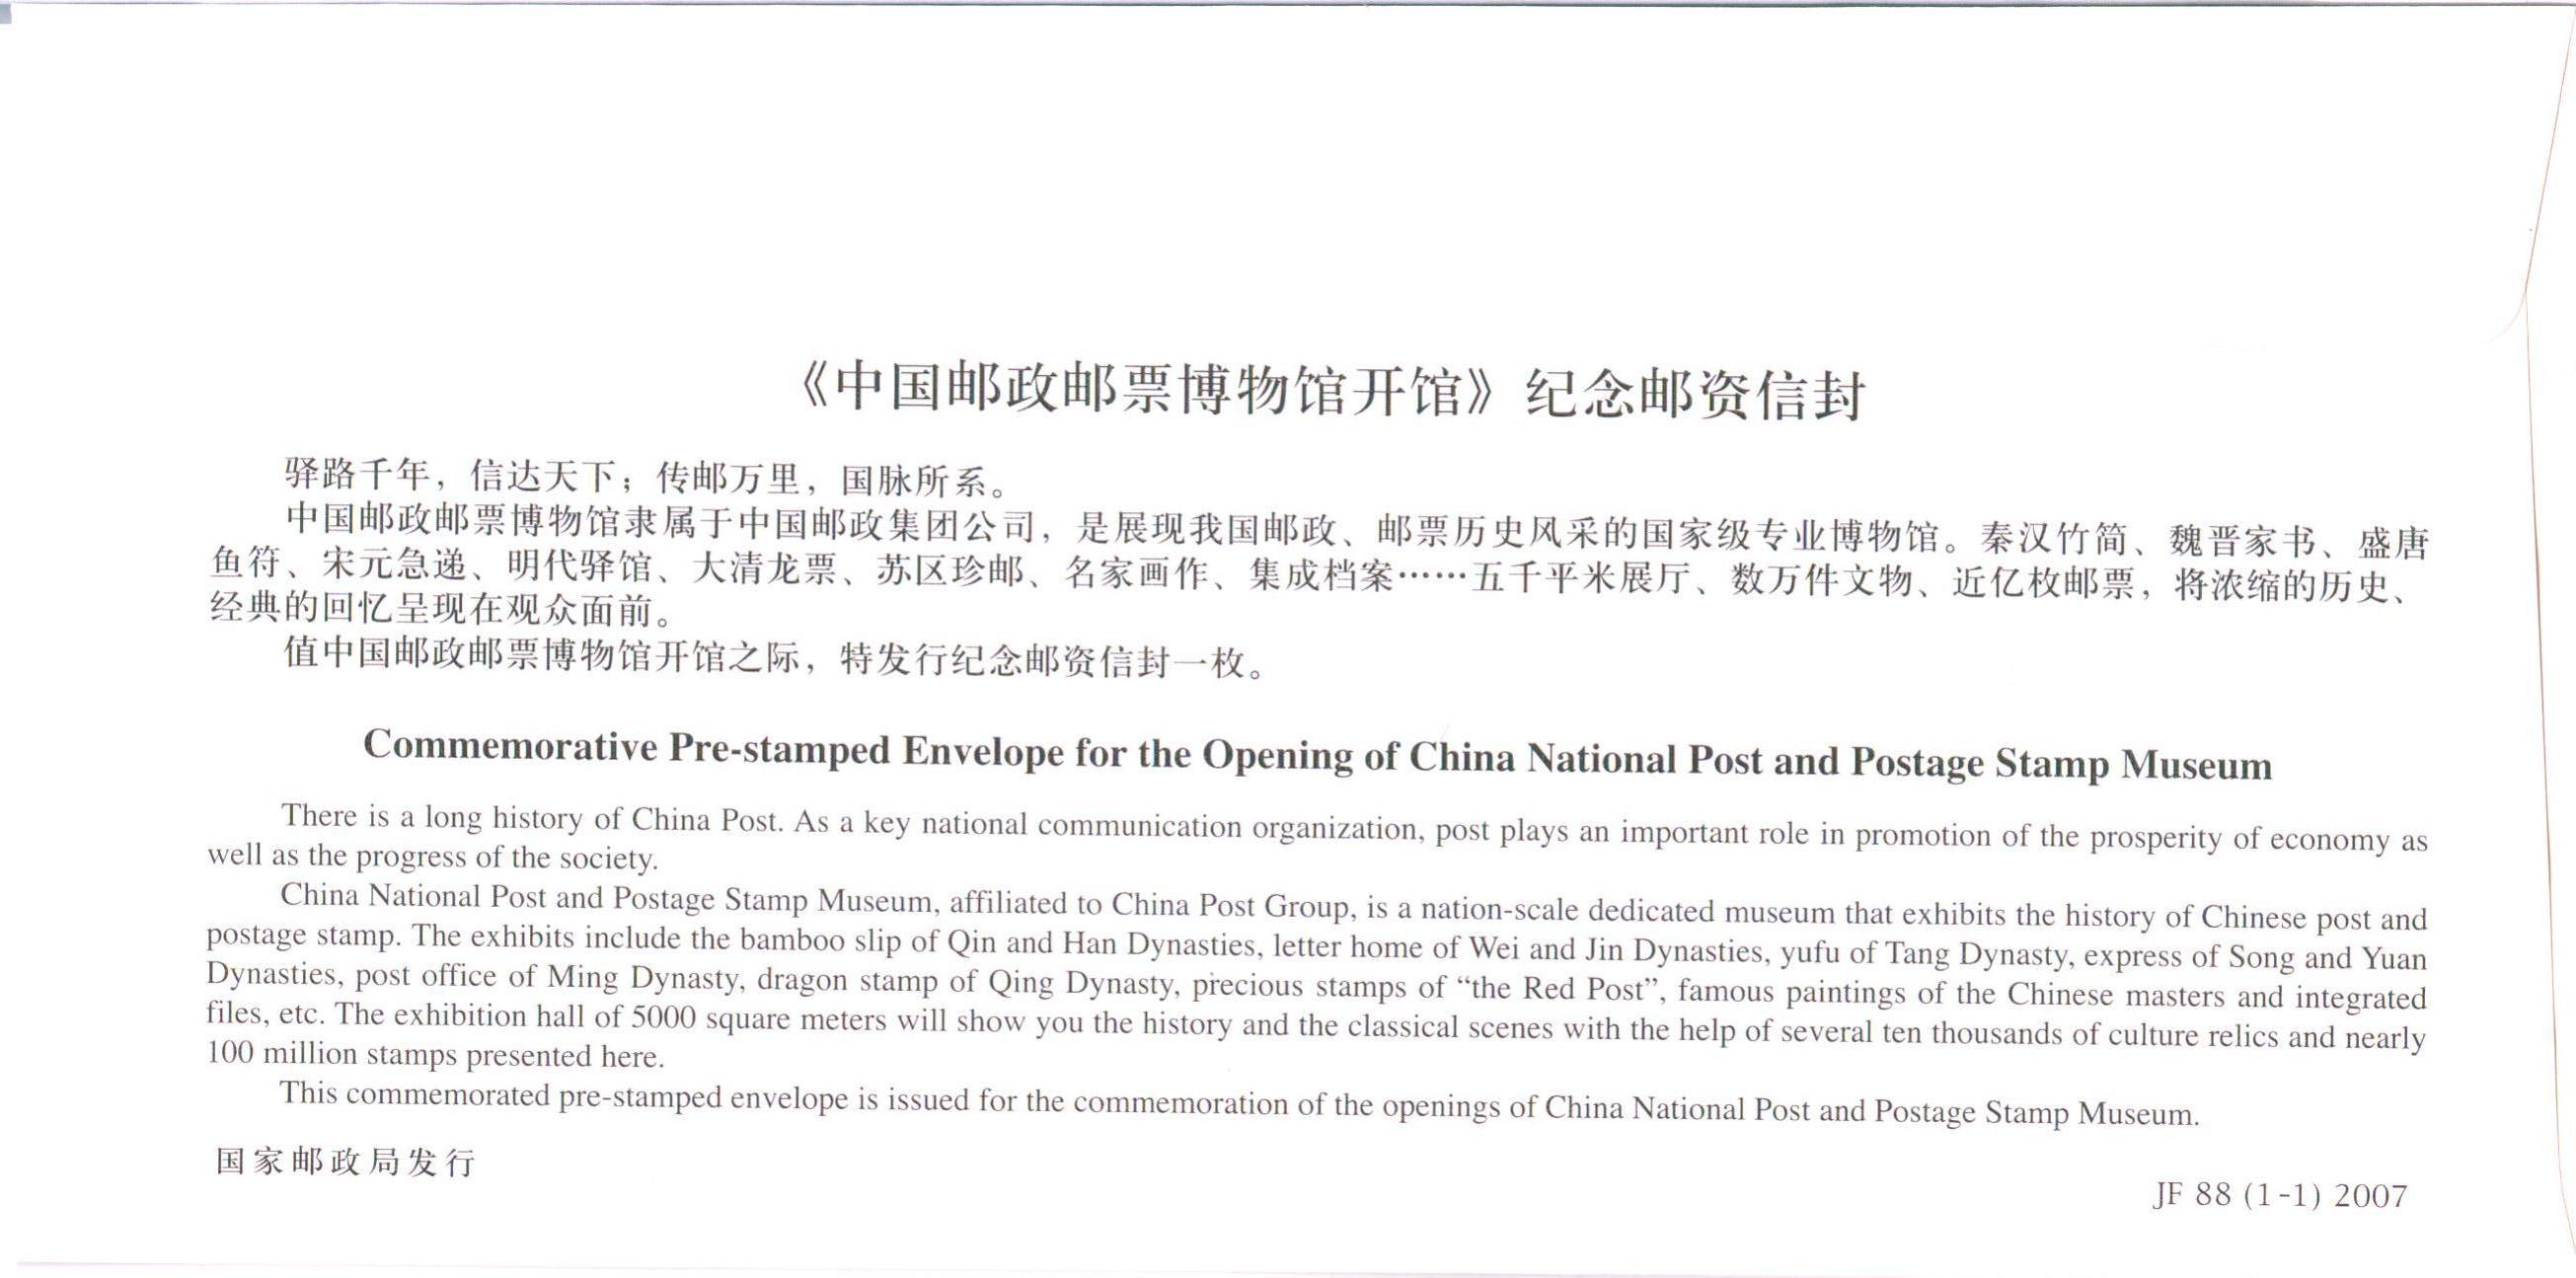 JF88 The Openning of China National Post Museum 2007